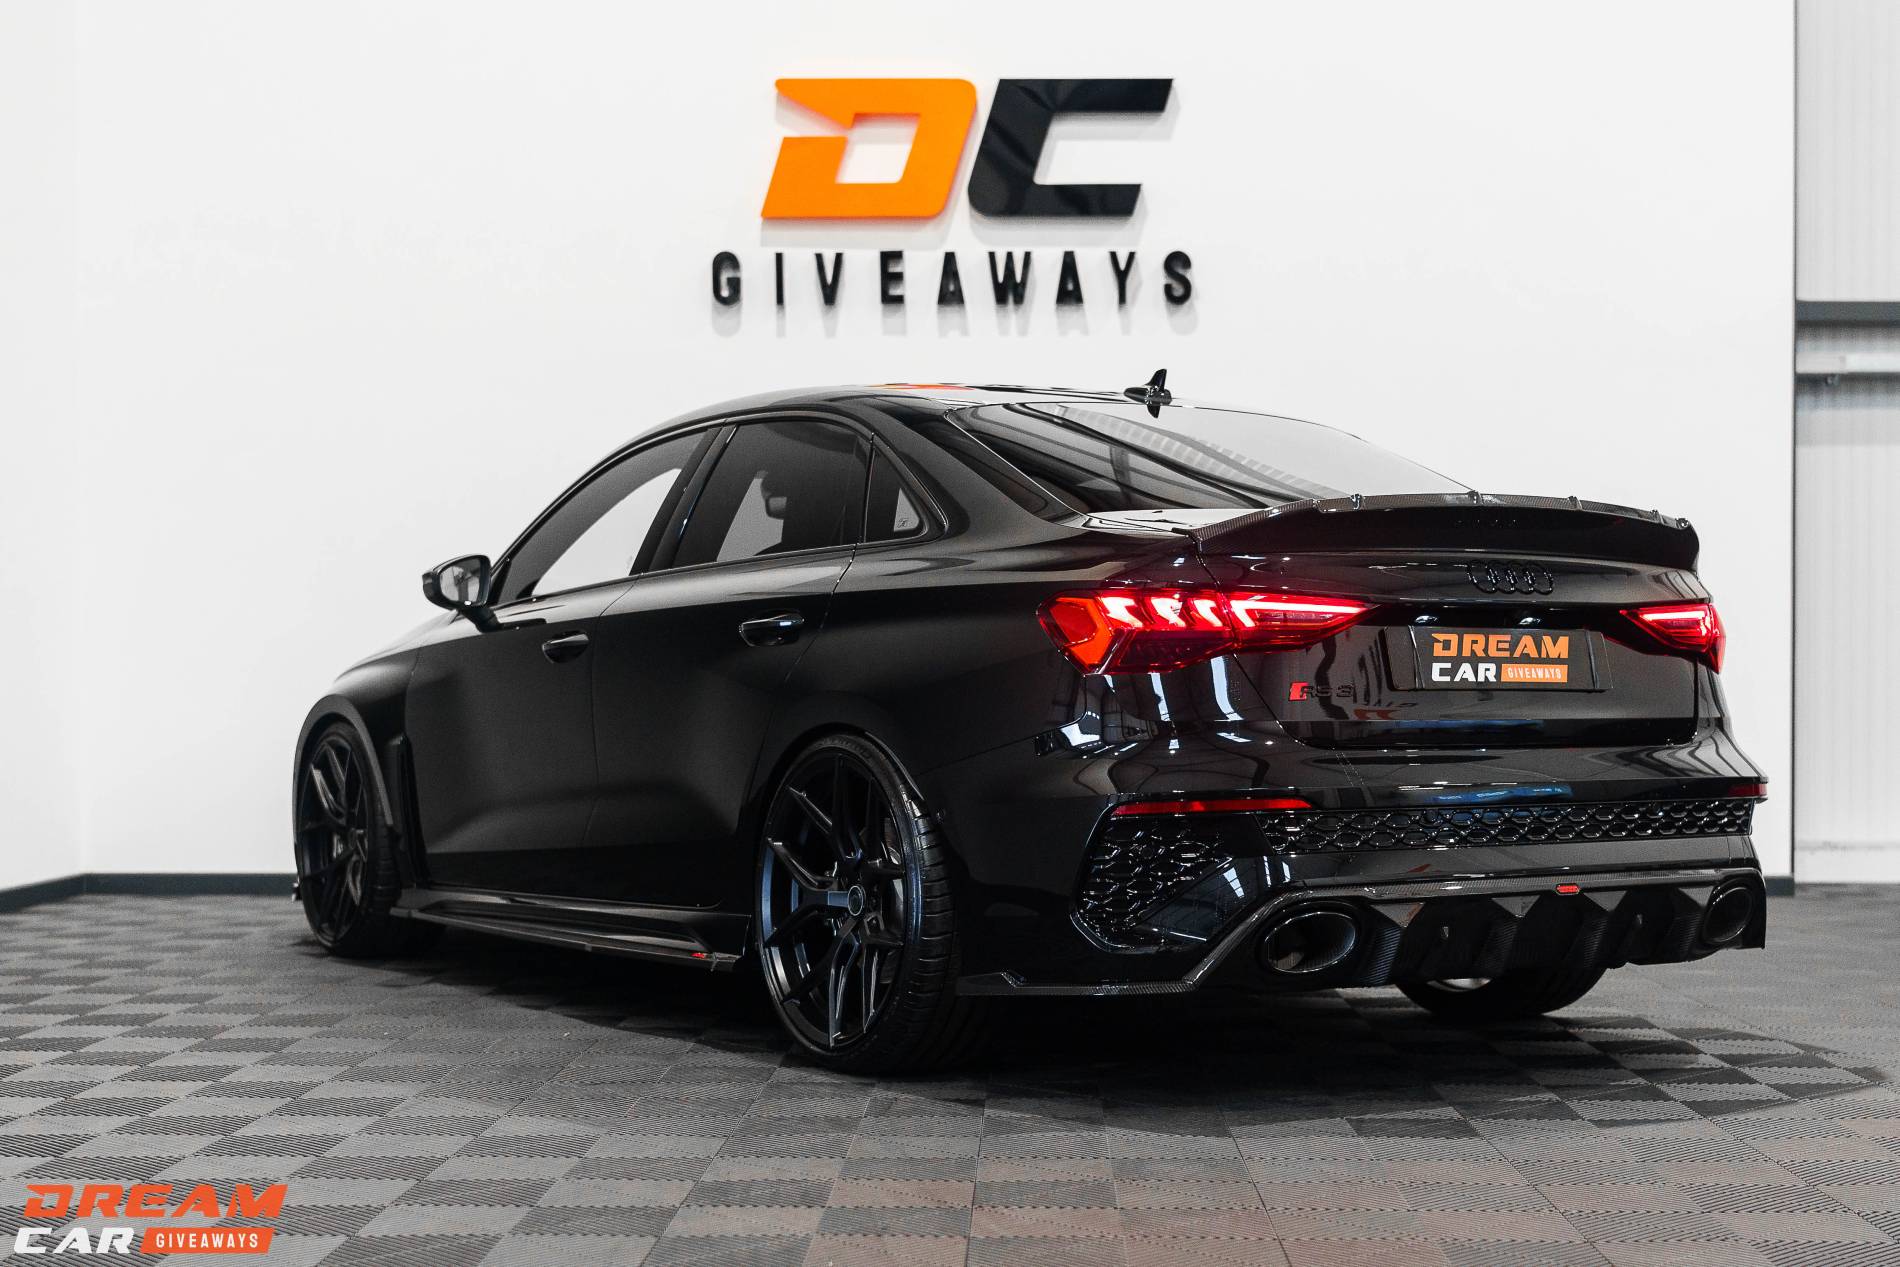 Win this Brand New 'Urban' Audi RS3 & £1000 or £54,000 Tax Free